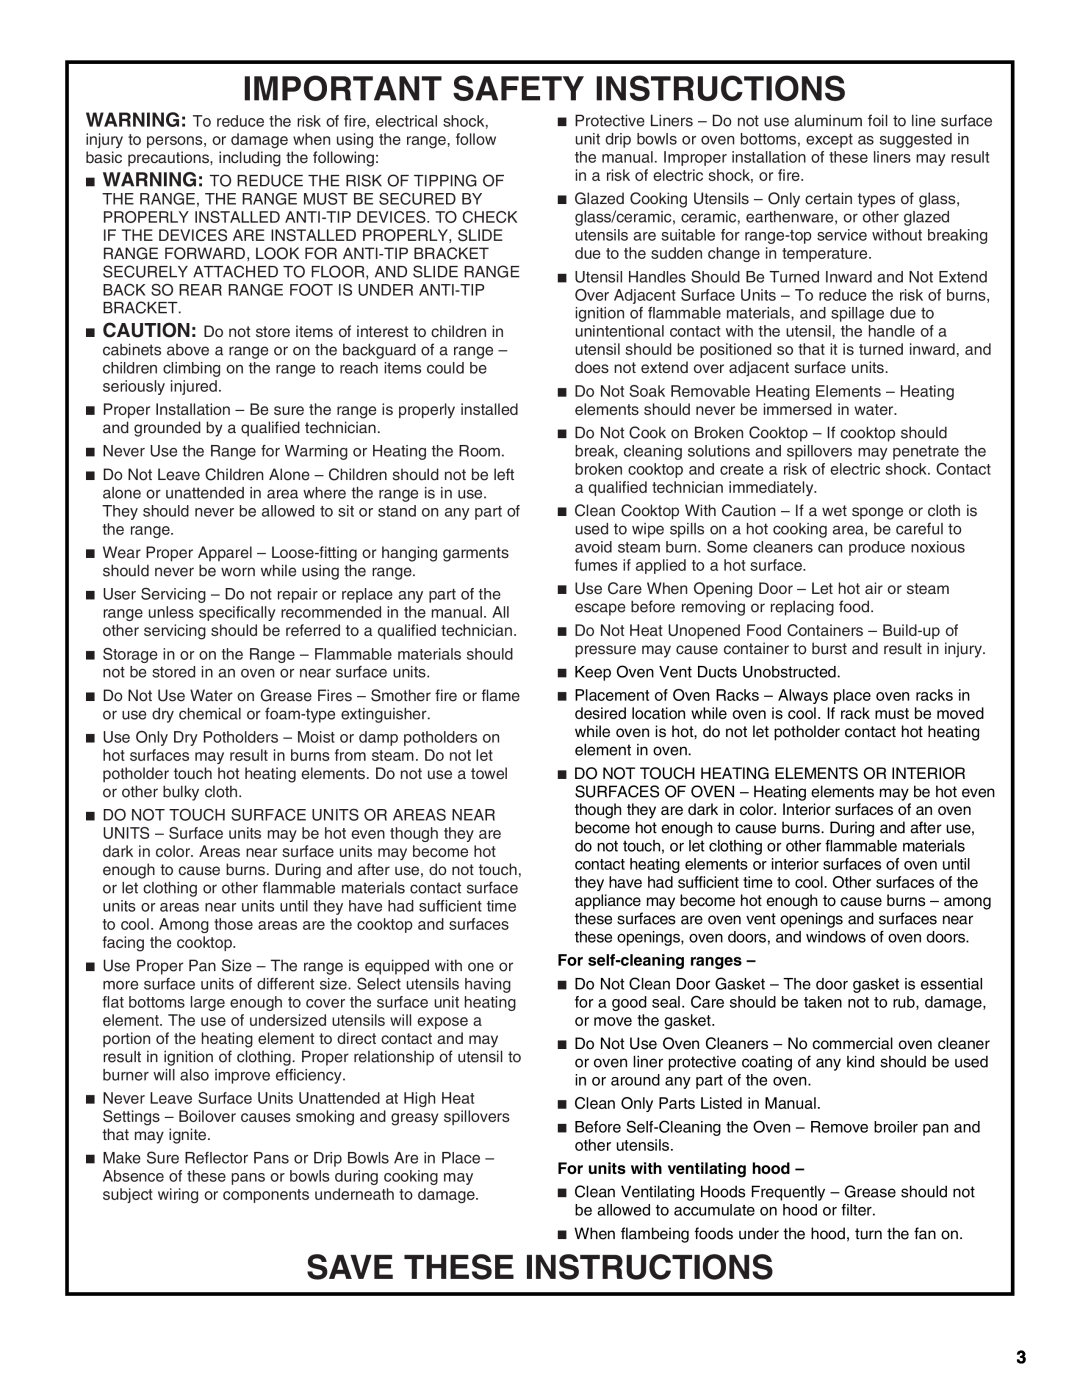 Whirlpool W10234647A warranty Important Safety Instructions, Save These Instructions, For self-cleaningranges 